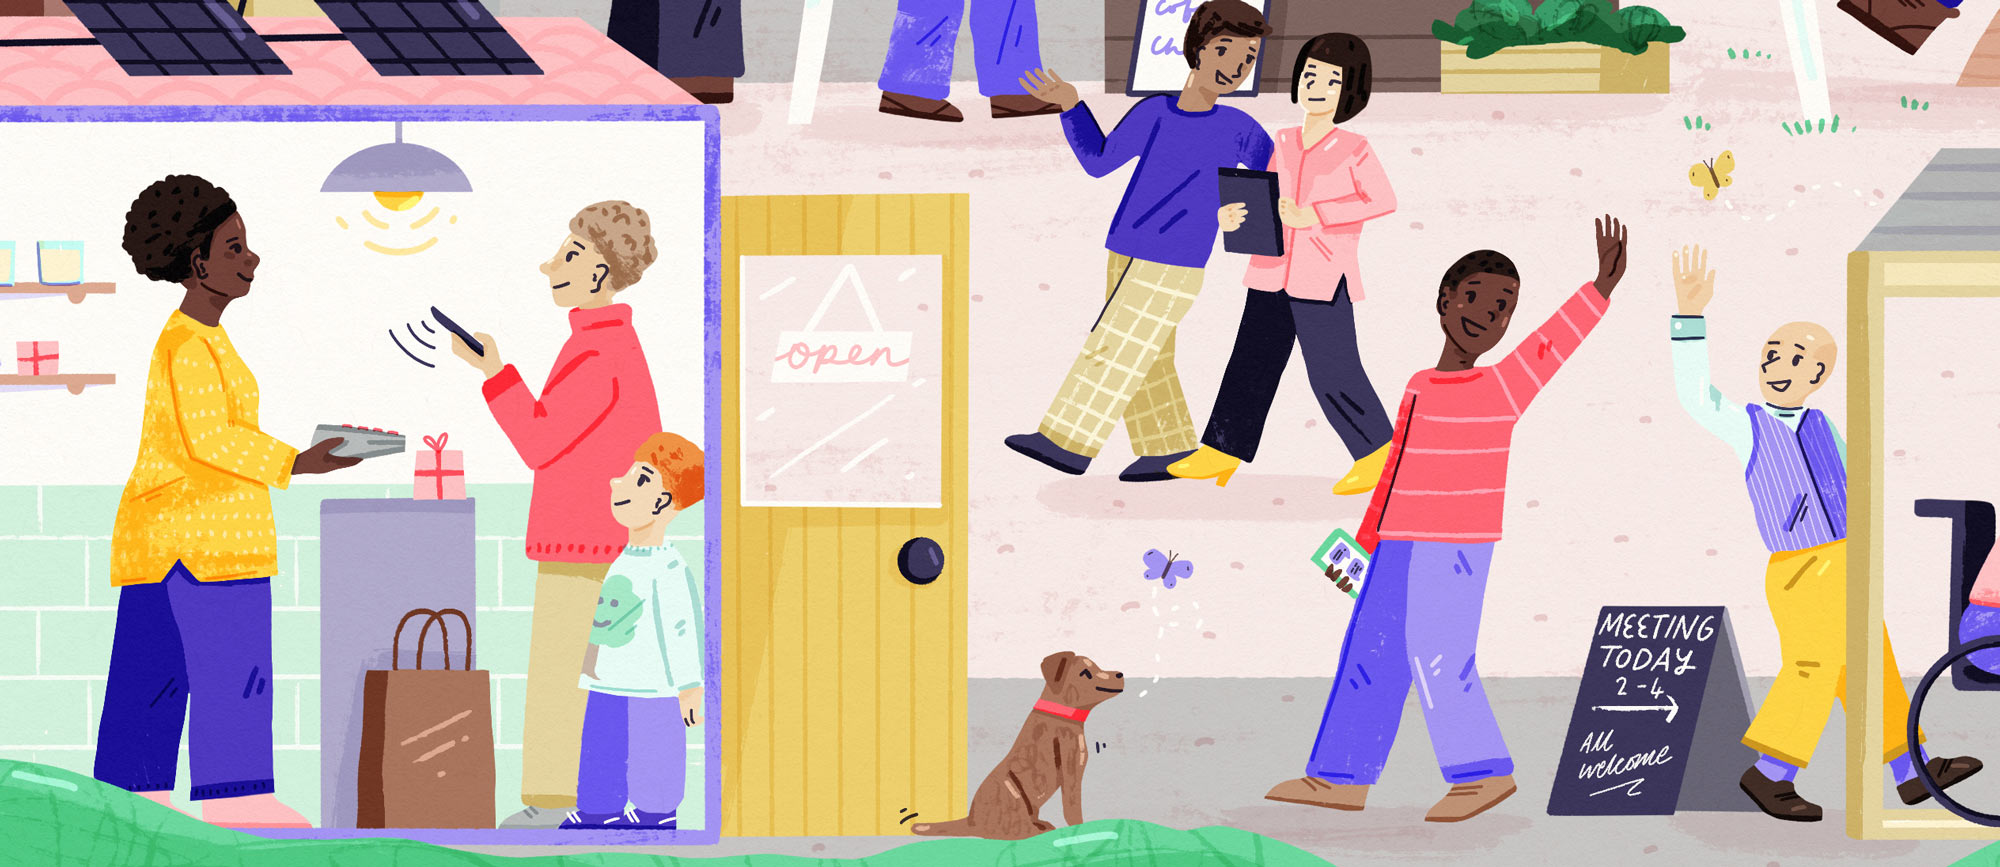 Section of banner illustration for a website on community tech, by Elly Jahnz